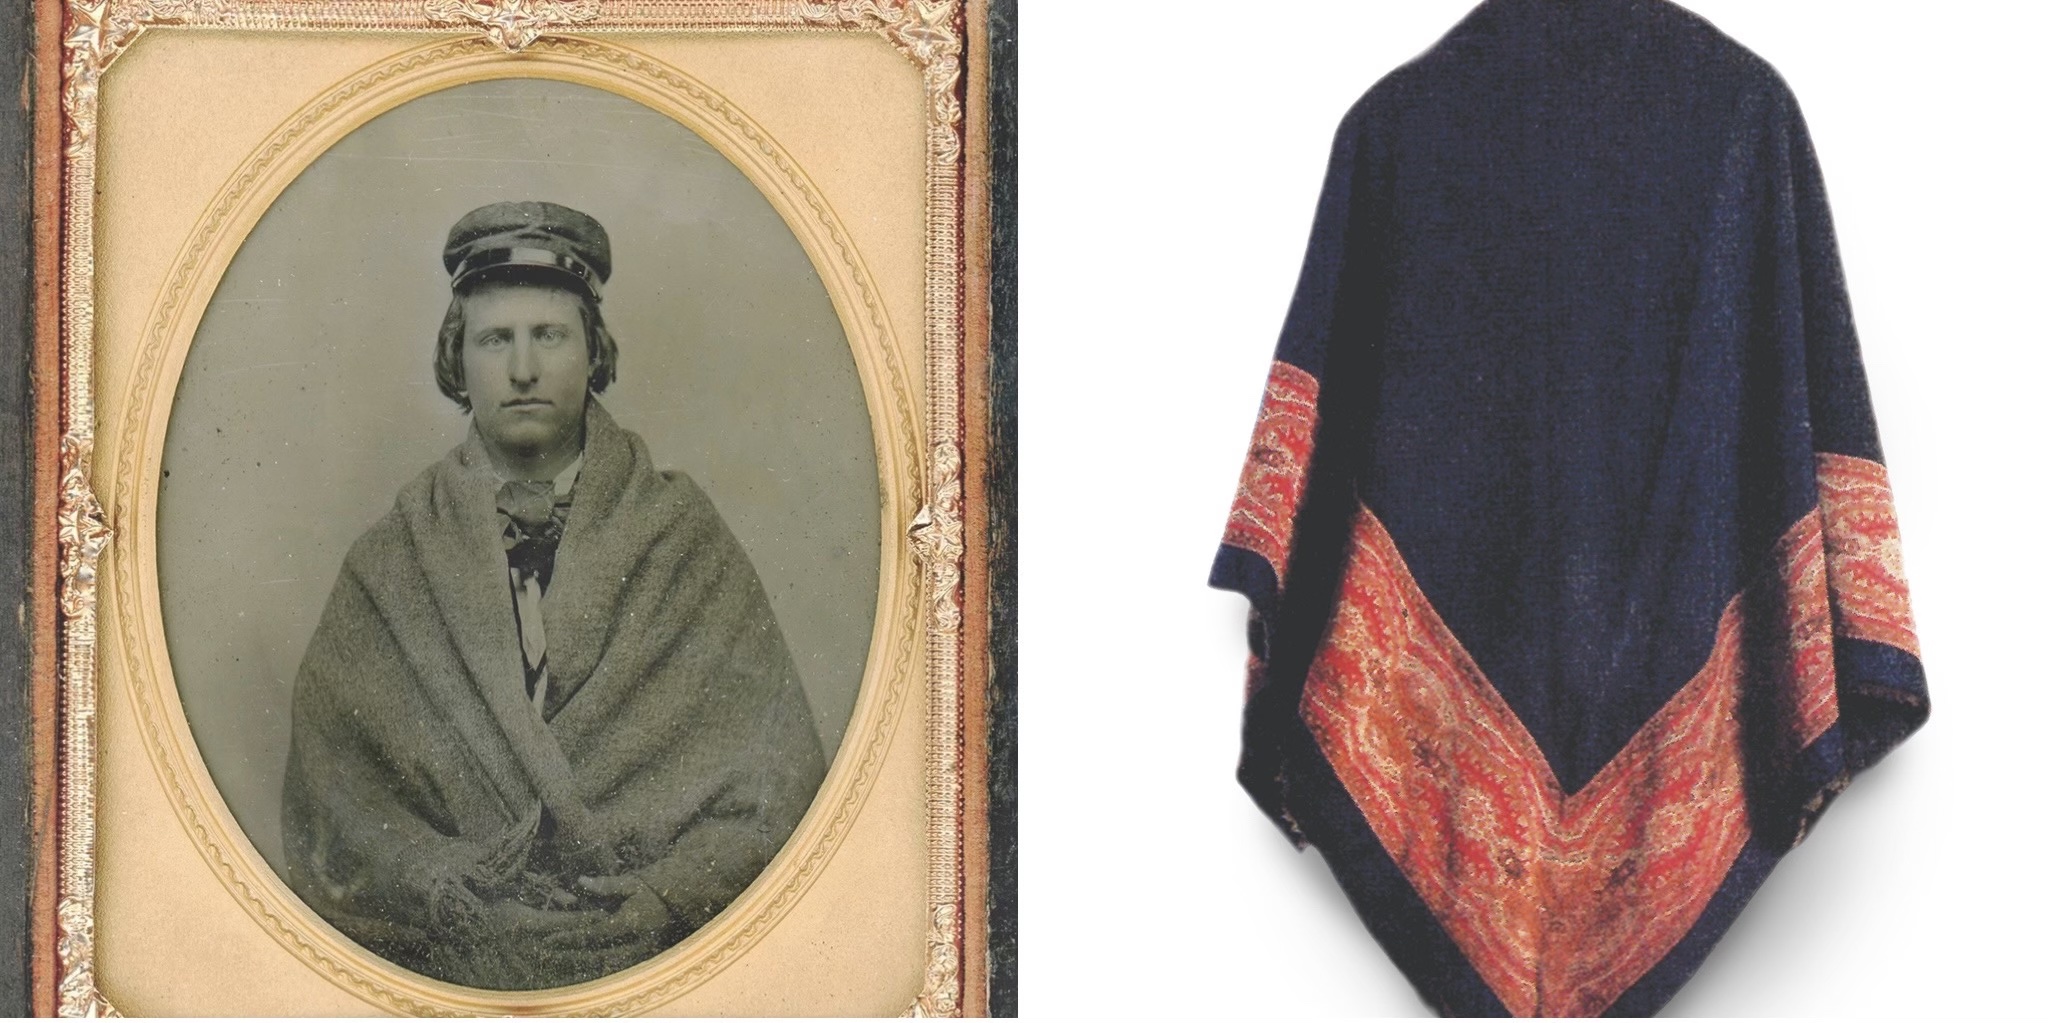 Men often wore plain shawls during the Civil War era, as illustrated in the left image. In the confusion, however, Varina threw her feminine paisley decorated shawl, at right, on Davis’ shoulders. (Dana B.Shoaf collection; Beauvoir)